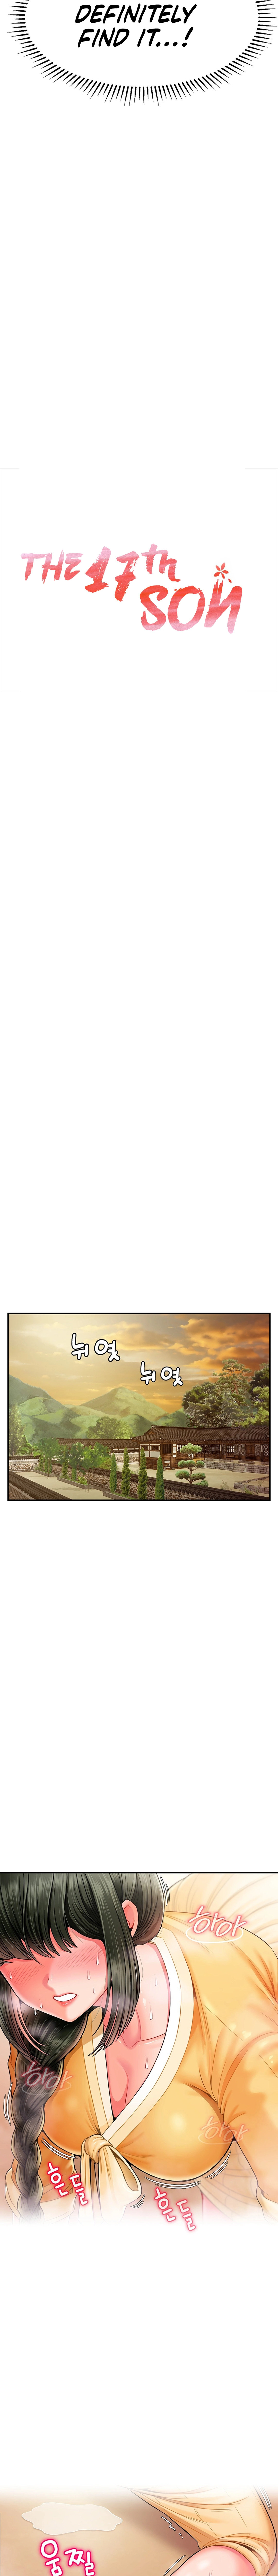 The 17th Son Chapter 2 - Page 2